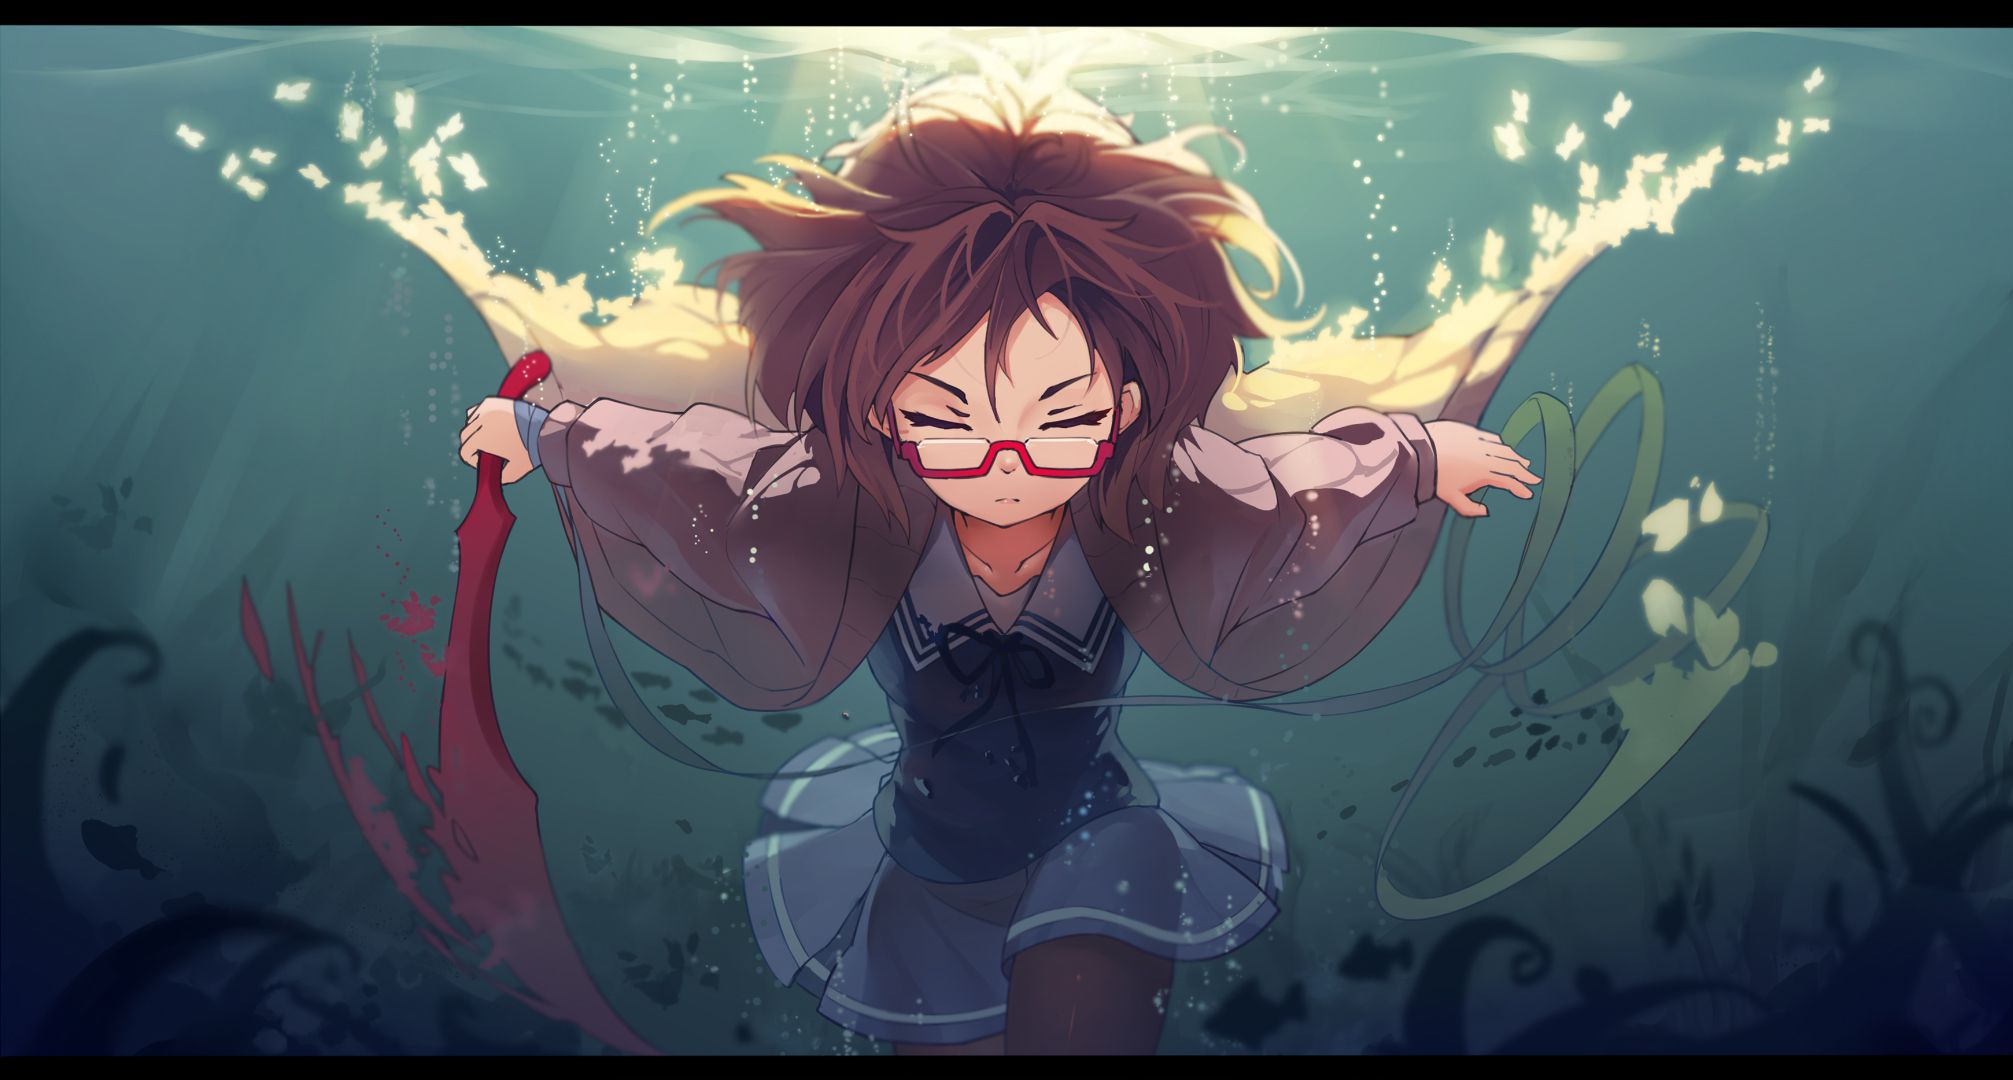 Beyond The Boundary HD Wallpaper Image Background